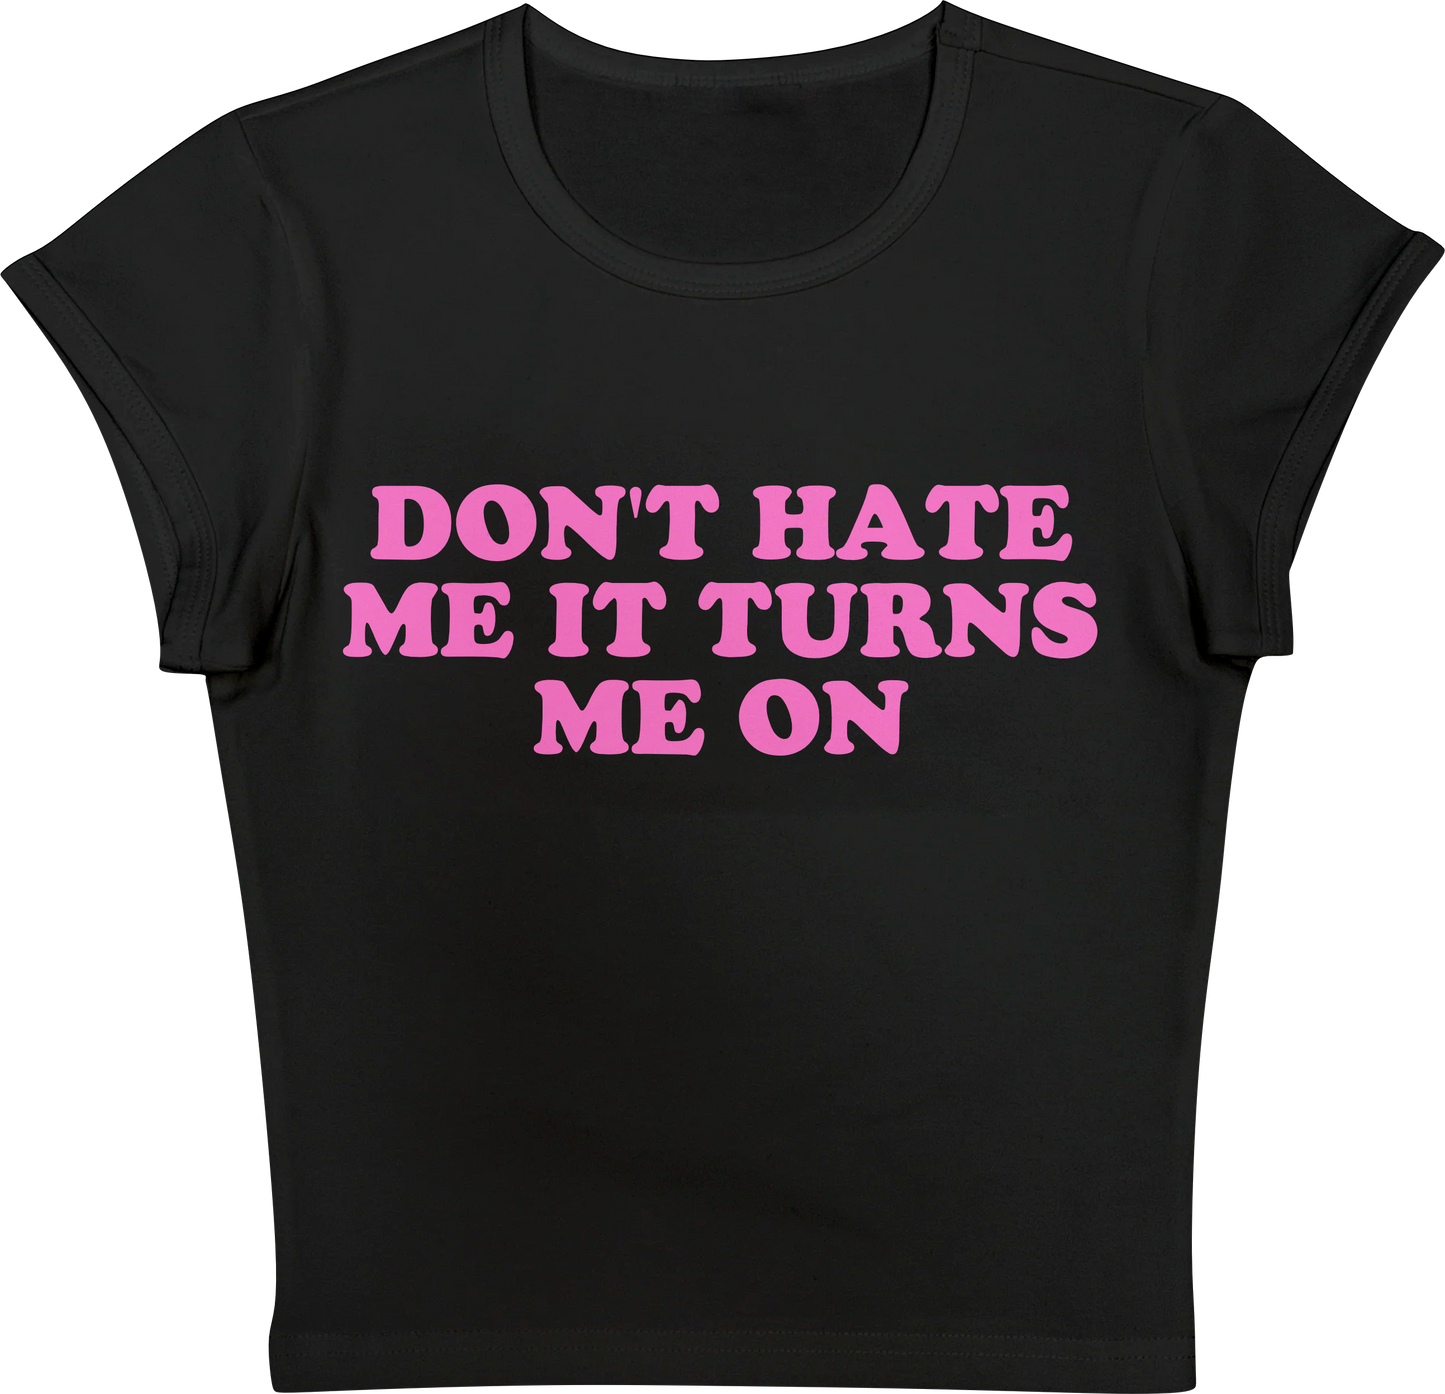 Don't Hate Me it Turns Me On Black Baby tee